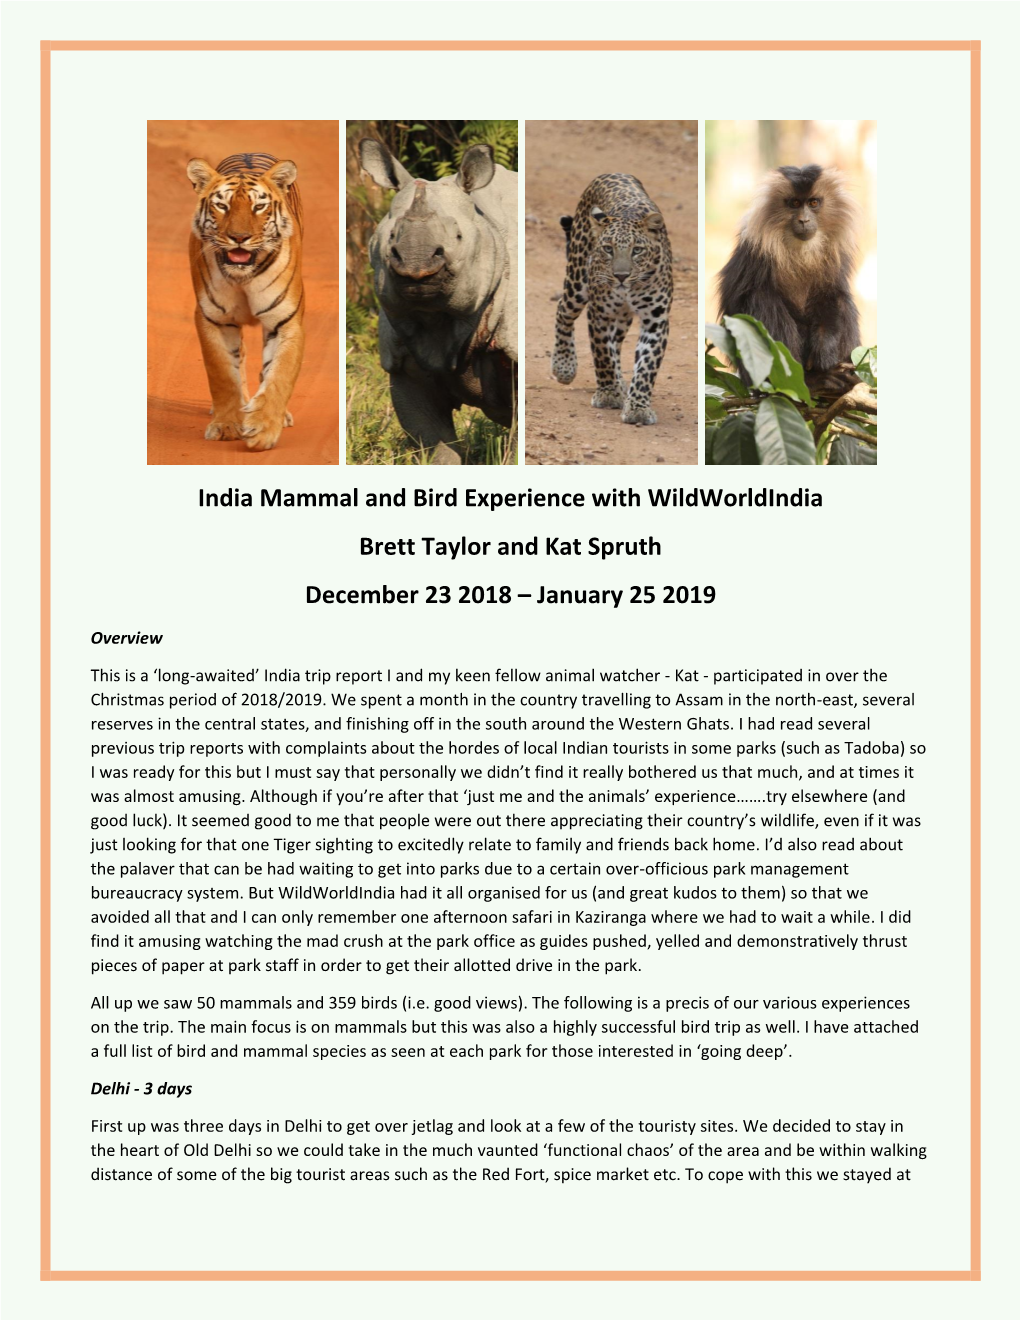 India Mammal and Bird Experience with Wildworldindia Brett Taylor and Kat Spruth December 23 2018 – January 25 2019